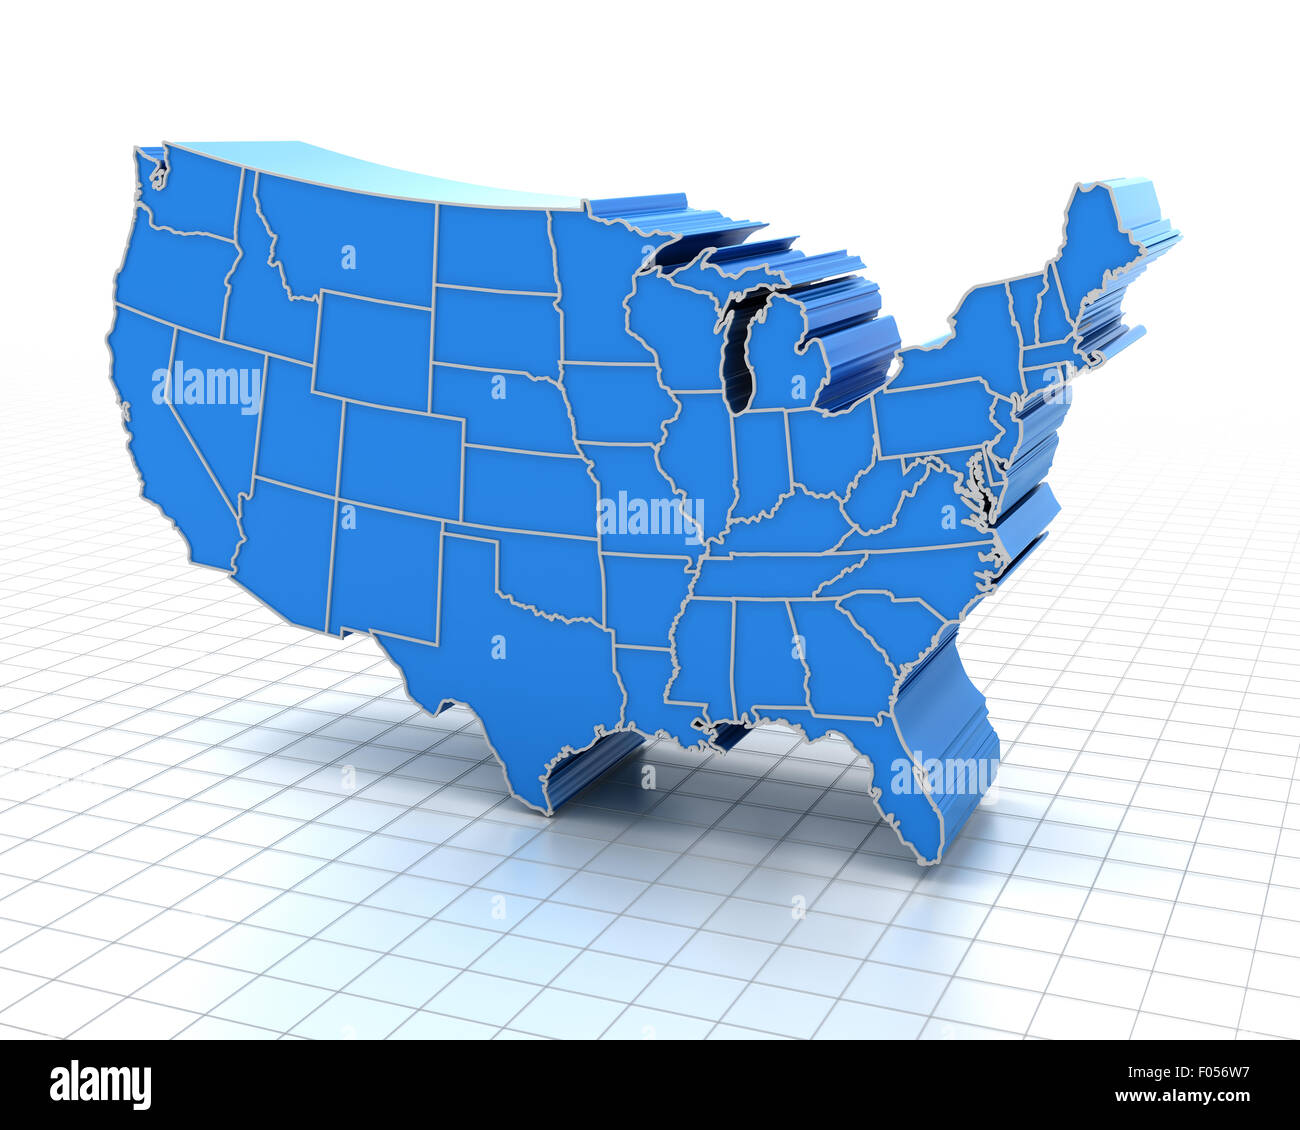 Extruded map of USA with state borders Stock Photo